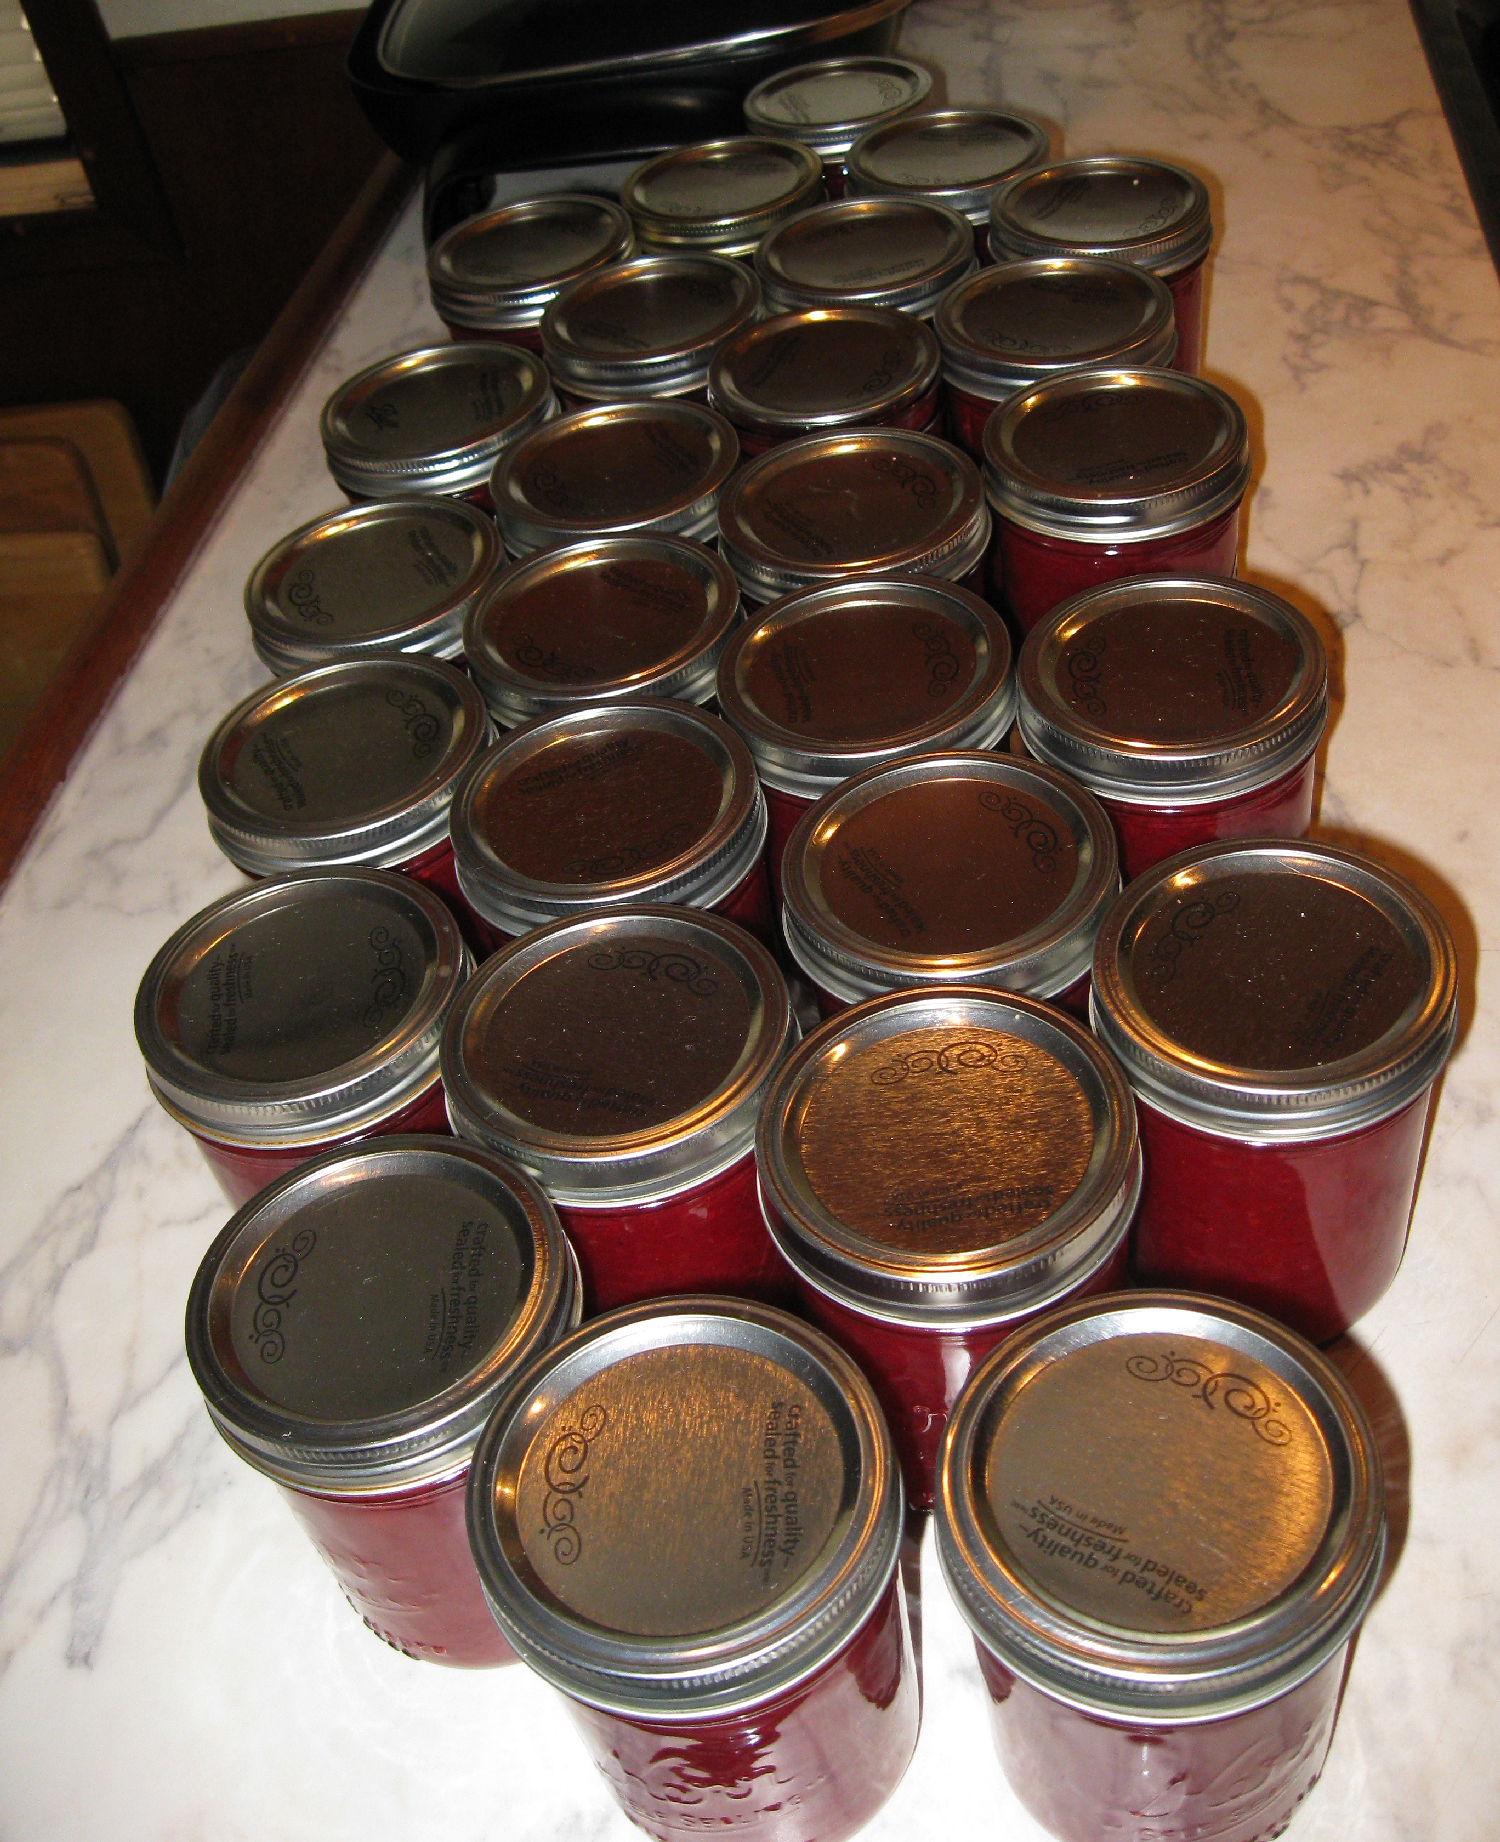 Red huckleberry jam ready for labeling. I thank my wonderful sweetheart for preserving this goodness in jars.